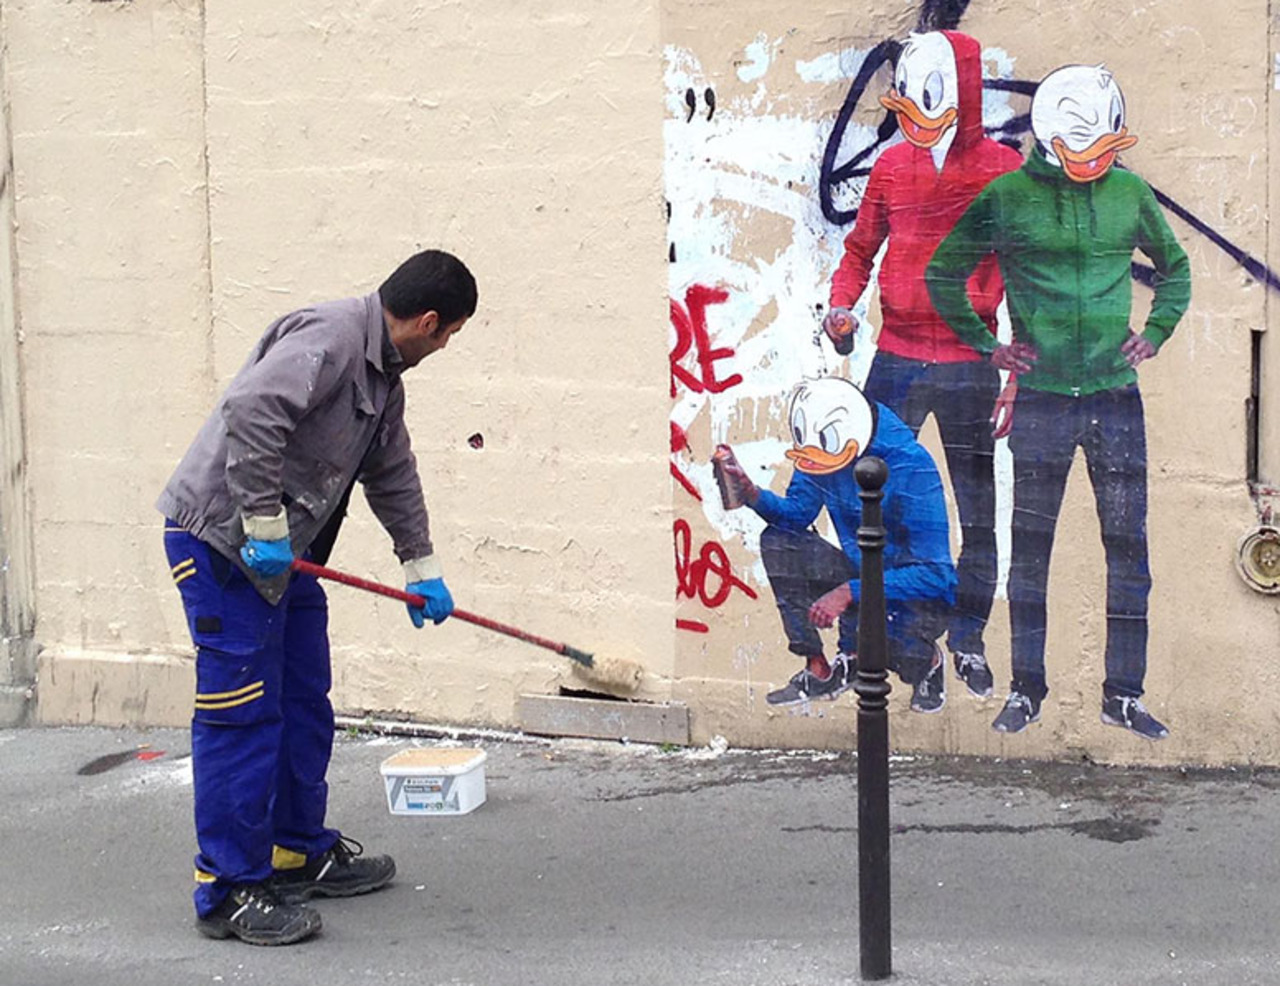 RT @RelaxInParis: pan_tabetai: RT _inkster_: This is too #funny! #Graffiti removal guy gets turned into #streetart in #Paris … http://t.co/dXZxoqziwI